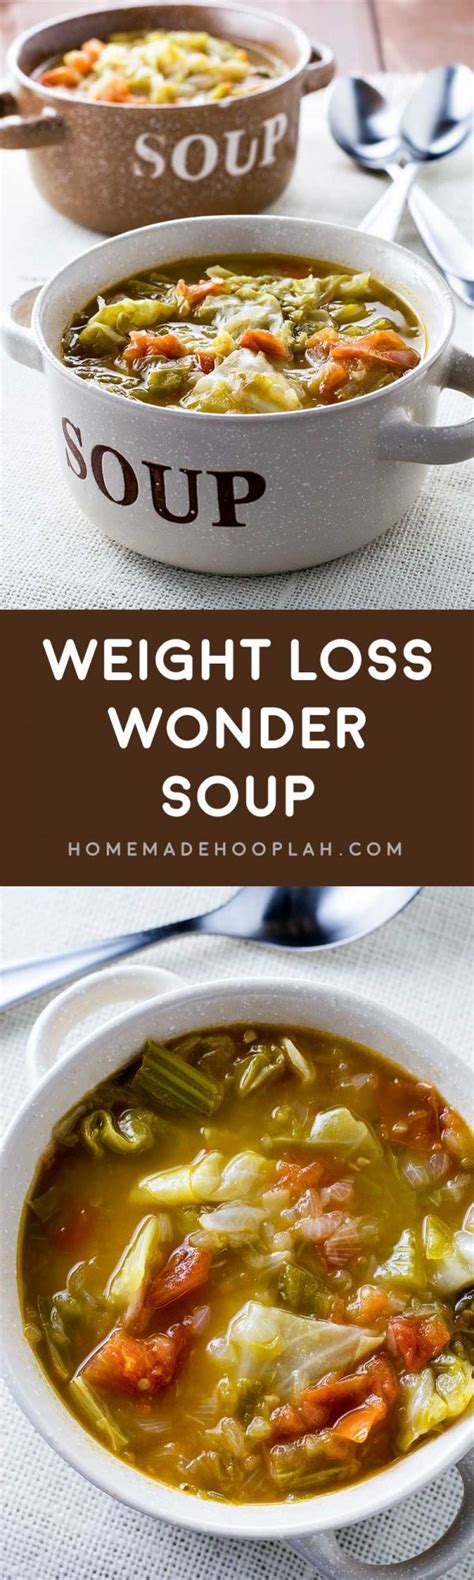 Moreover, the manual hard work of cutting and cooking may make you order takeaways, throwing you off… in other words, soups are great for weight loss but tuff to prepare. Weight Loss Wonder Soup - Homemade Hooplah